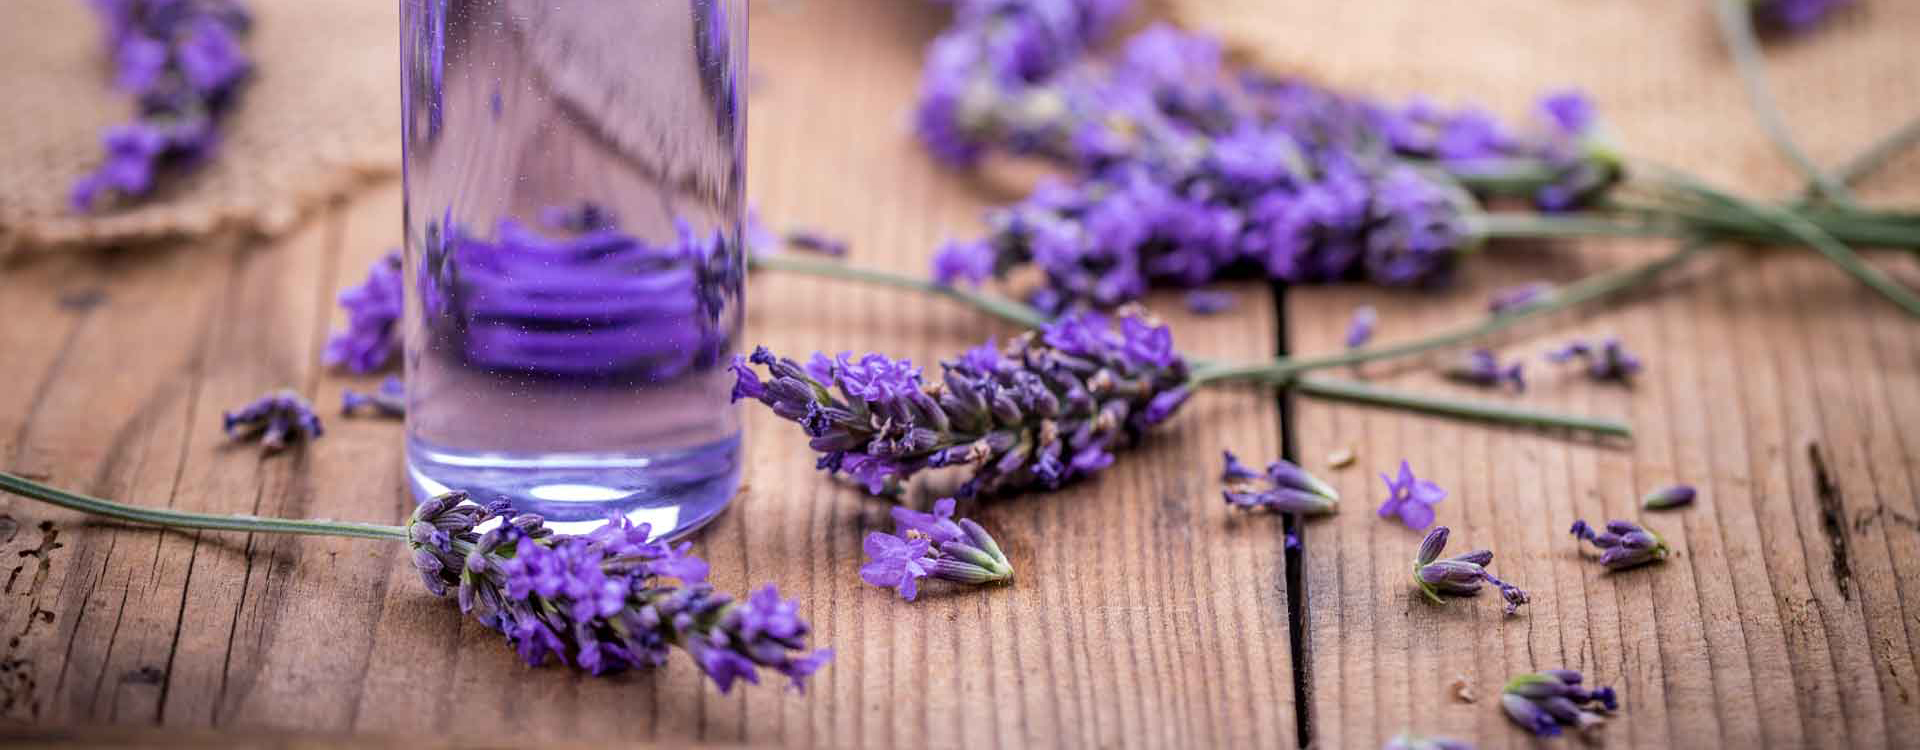 Other uses of Lavender